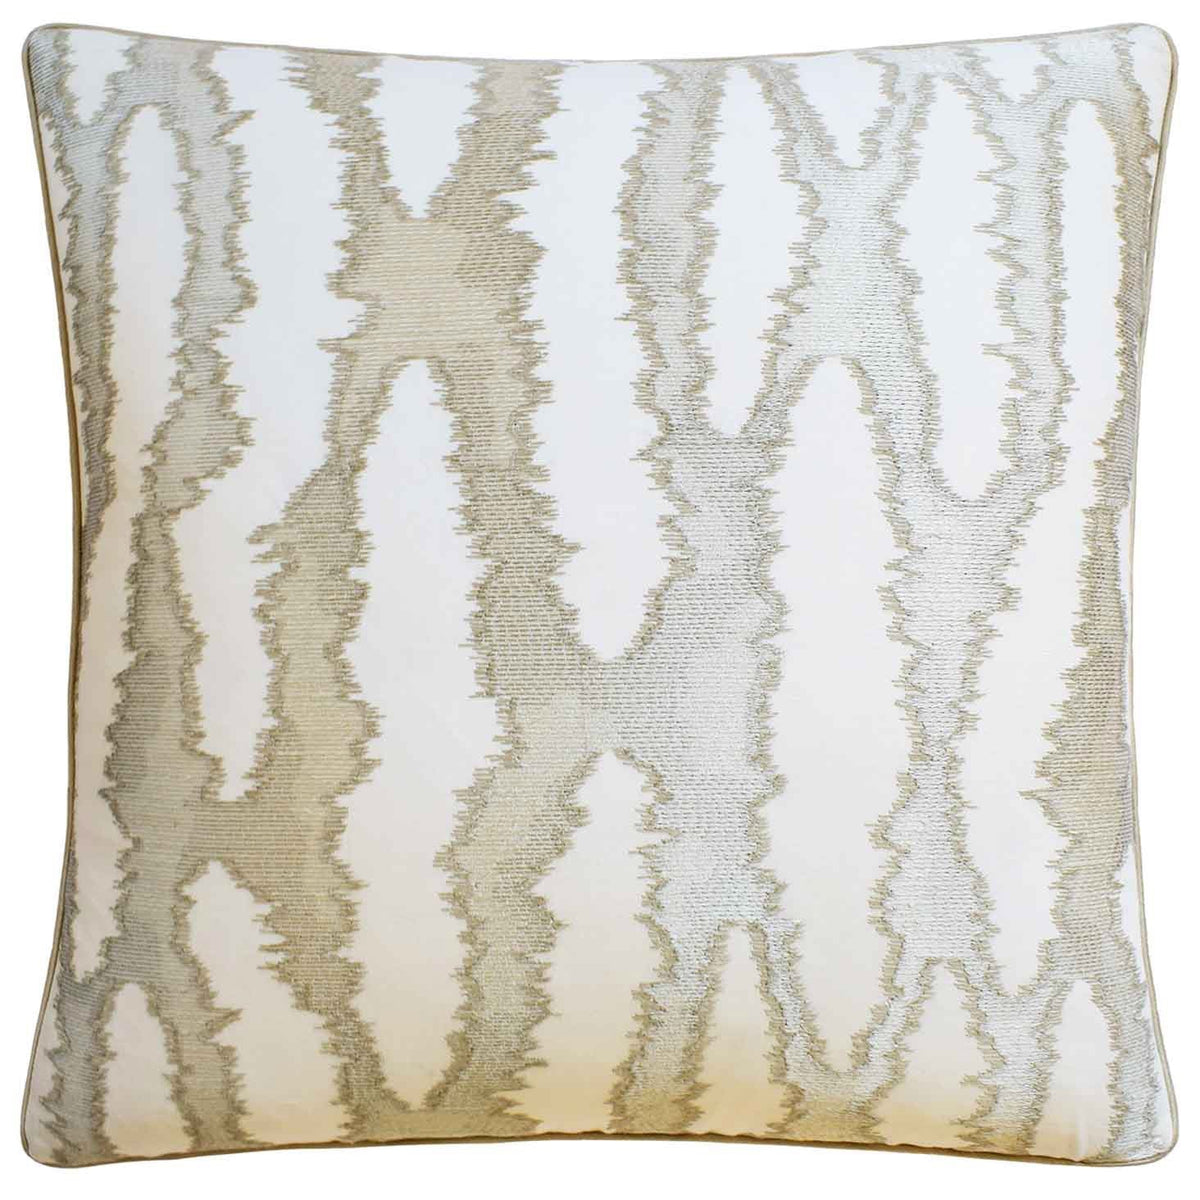 Azulejo Sand Dollar Decorative Pillow | Ryan Studio at Fig Linens and Home